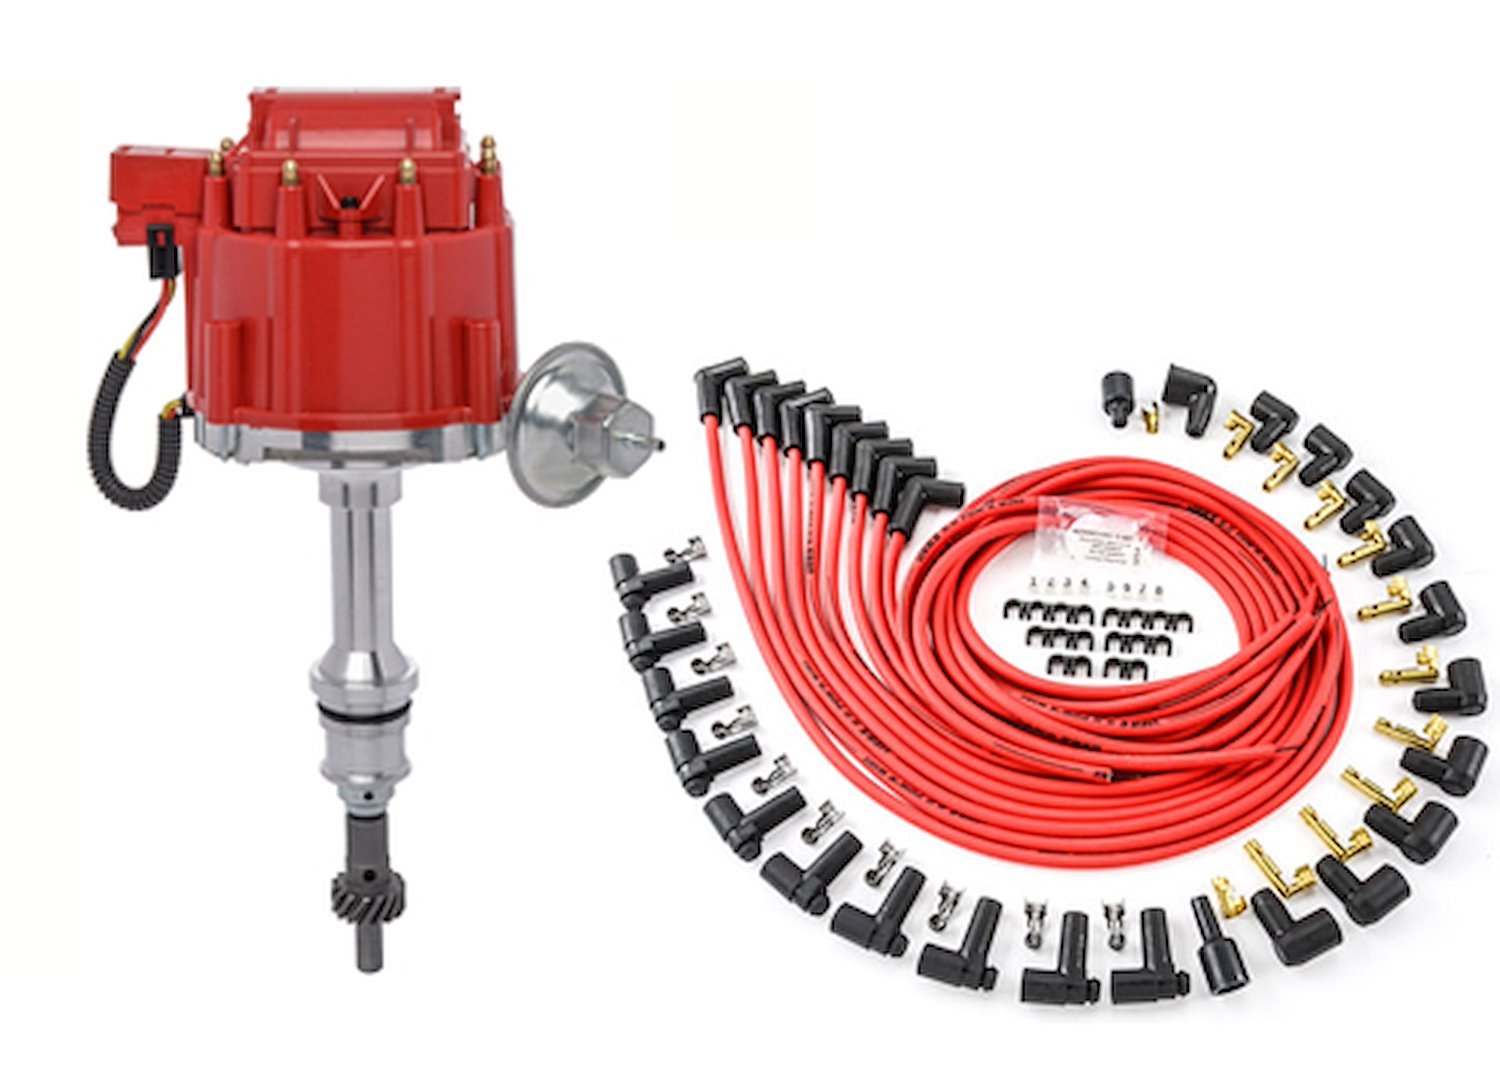 HEI Distributor and Spark Plug Wire Kit for Ford Small Block 221-302 V8